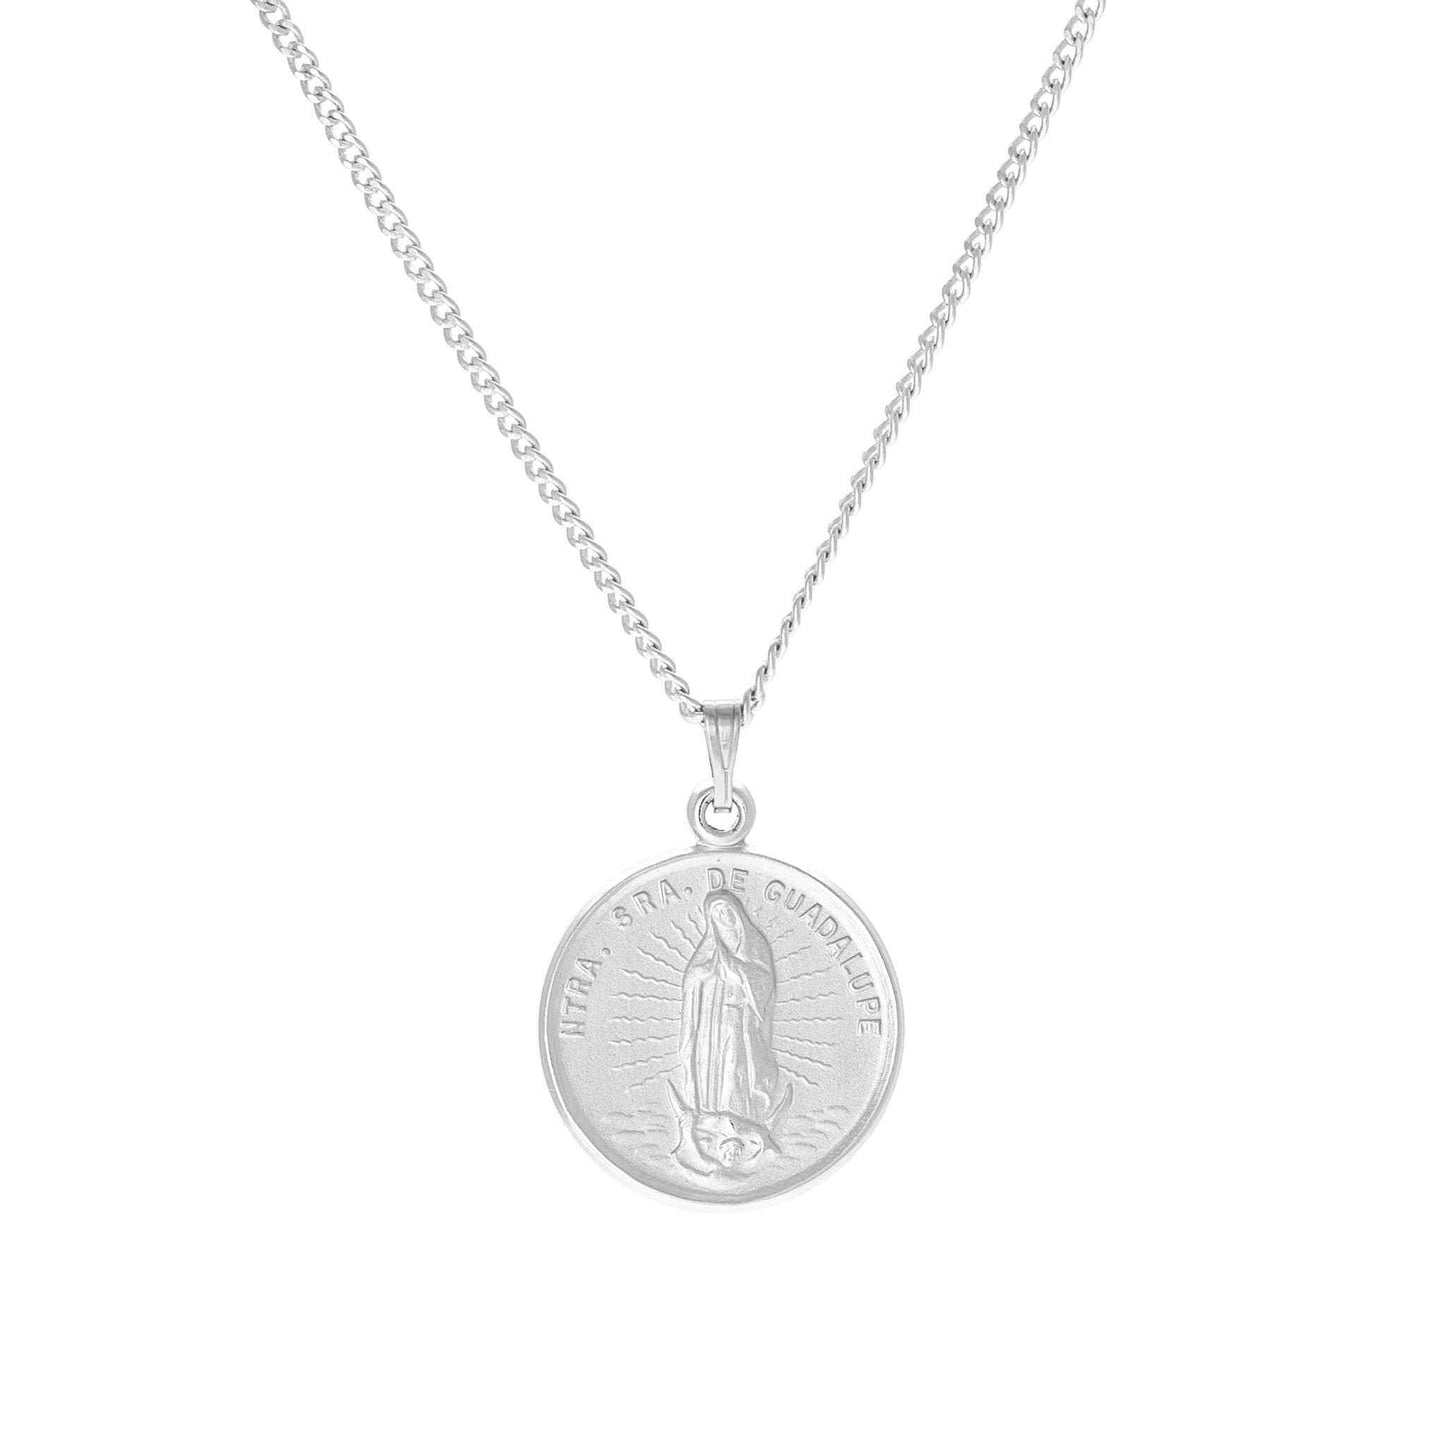 A round our lady of guadalupe medal displayed on a neutral white background.